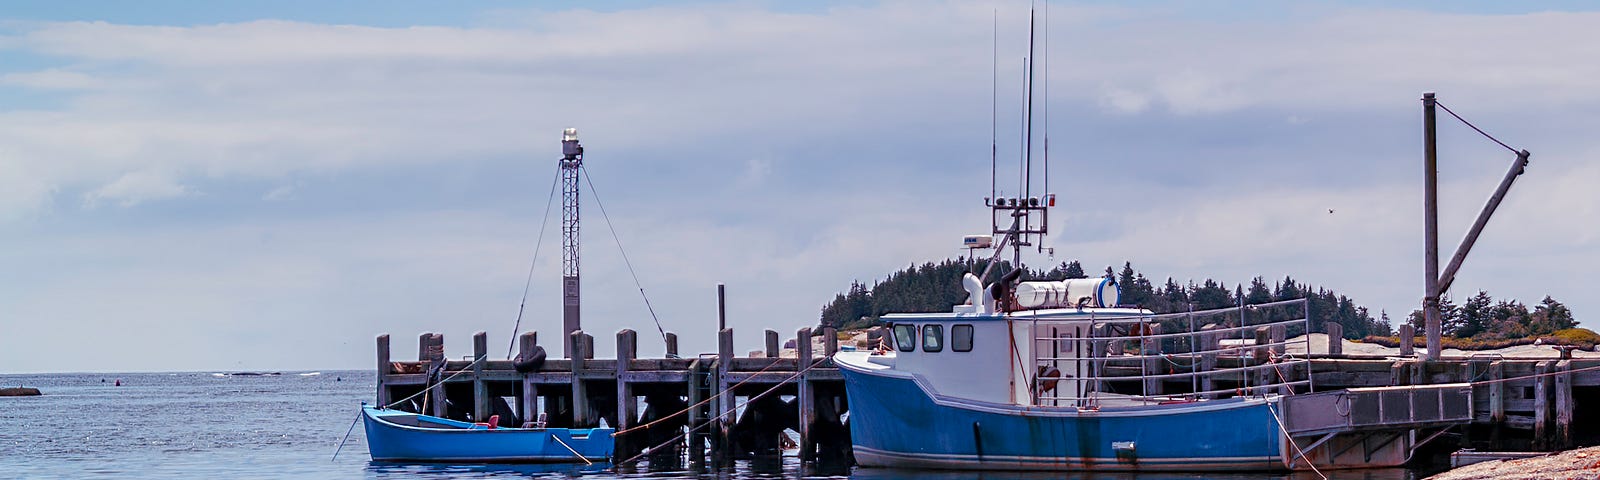 Fishing boats along a pier in the water near a point of rocks on a bright day.